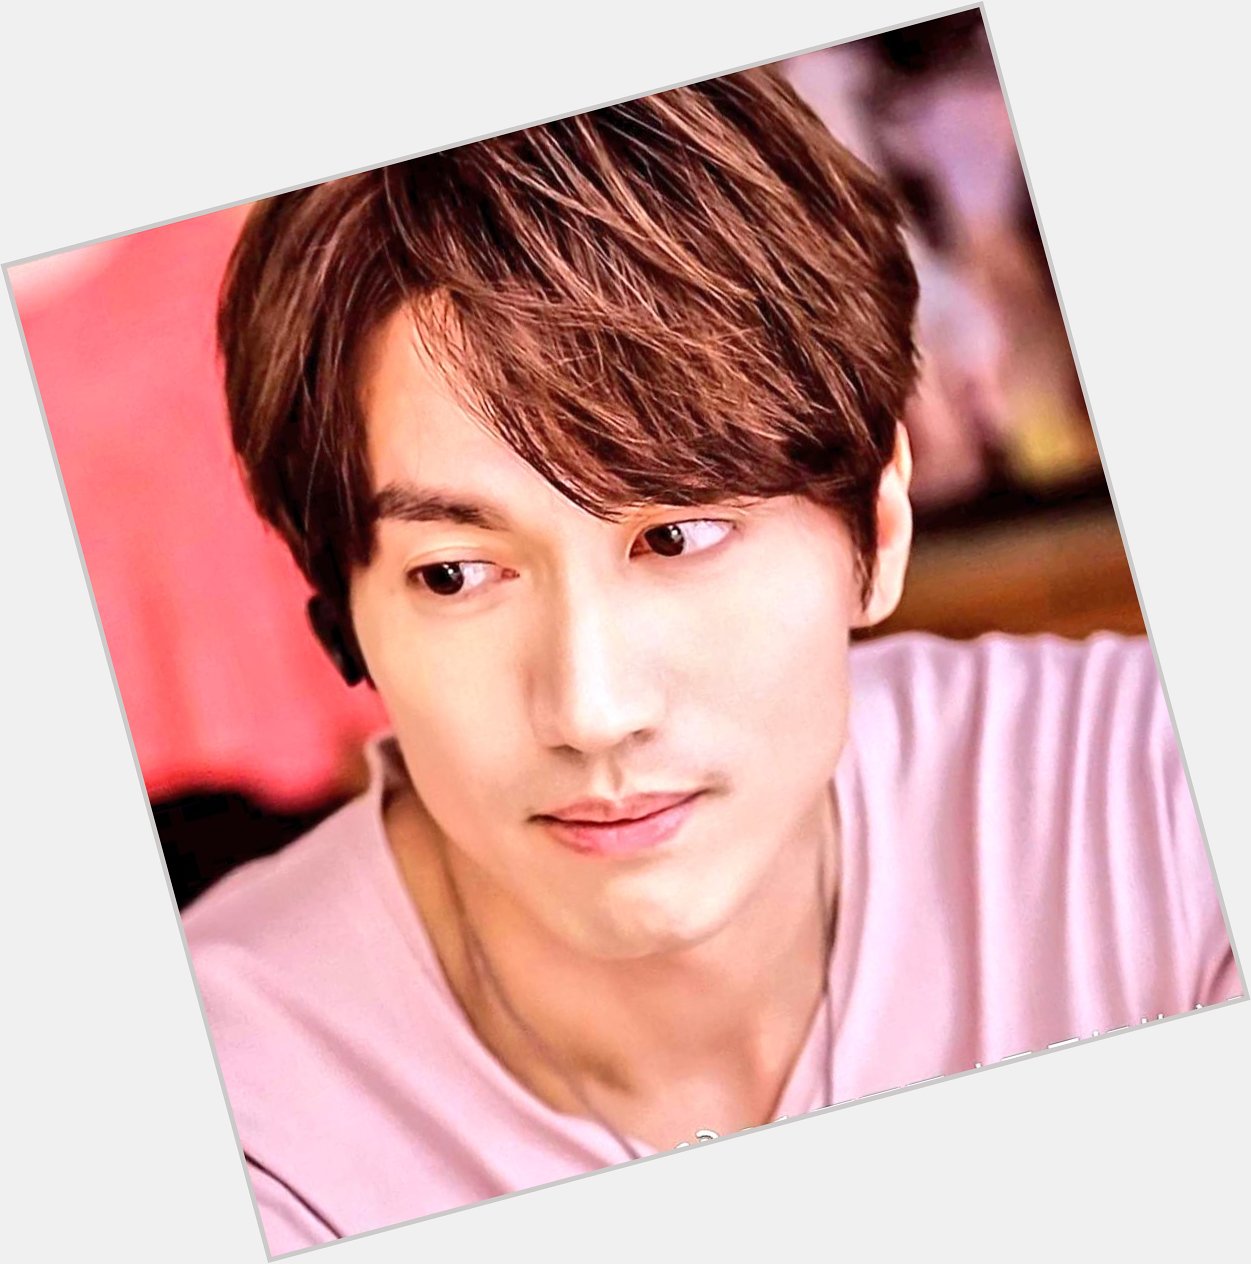 Happy Birthday To The King and Original Asian Heartrob Superstar
JERRY YAN   